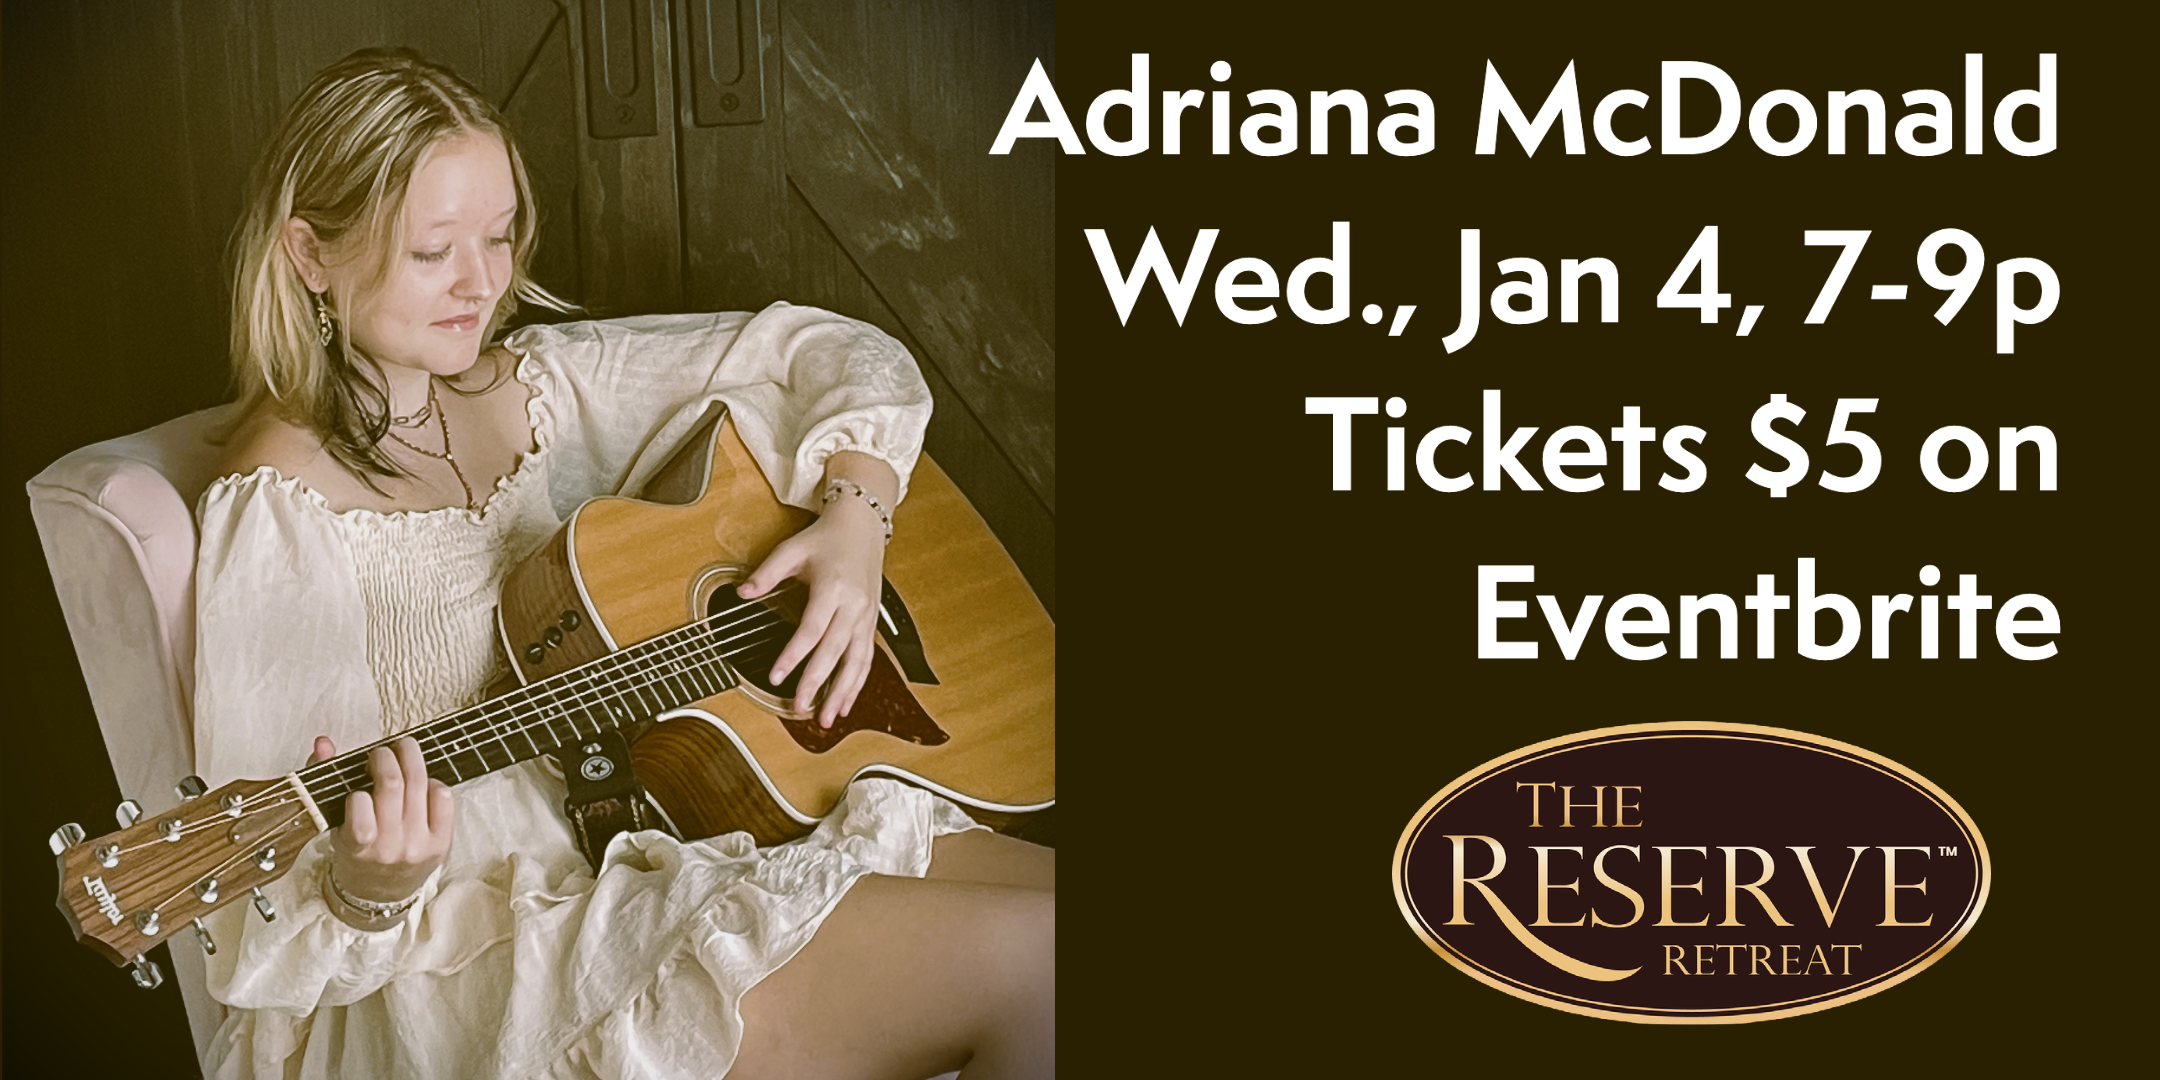 Indie artist Adriana McDonald performs live at The Reserve Retreat on Jan 4, from 7-9p